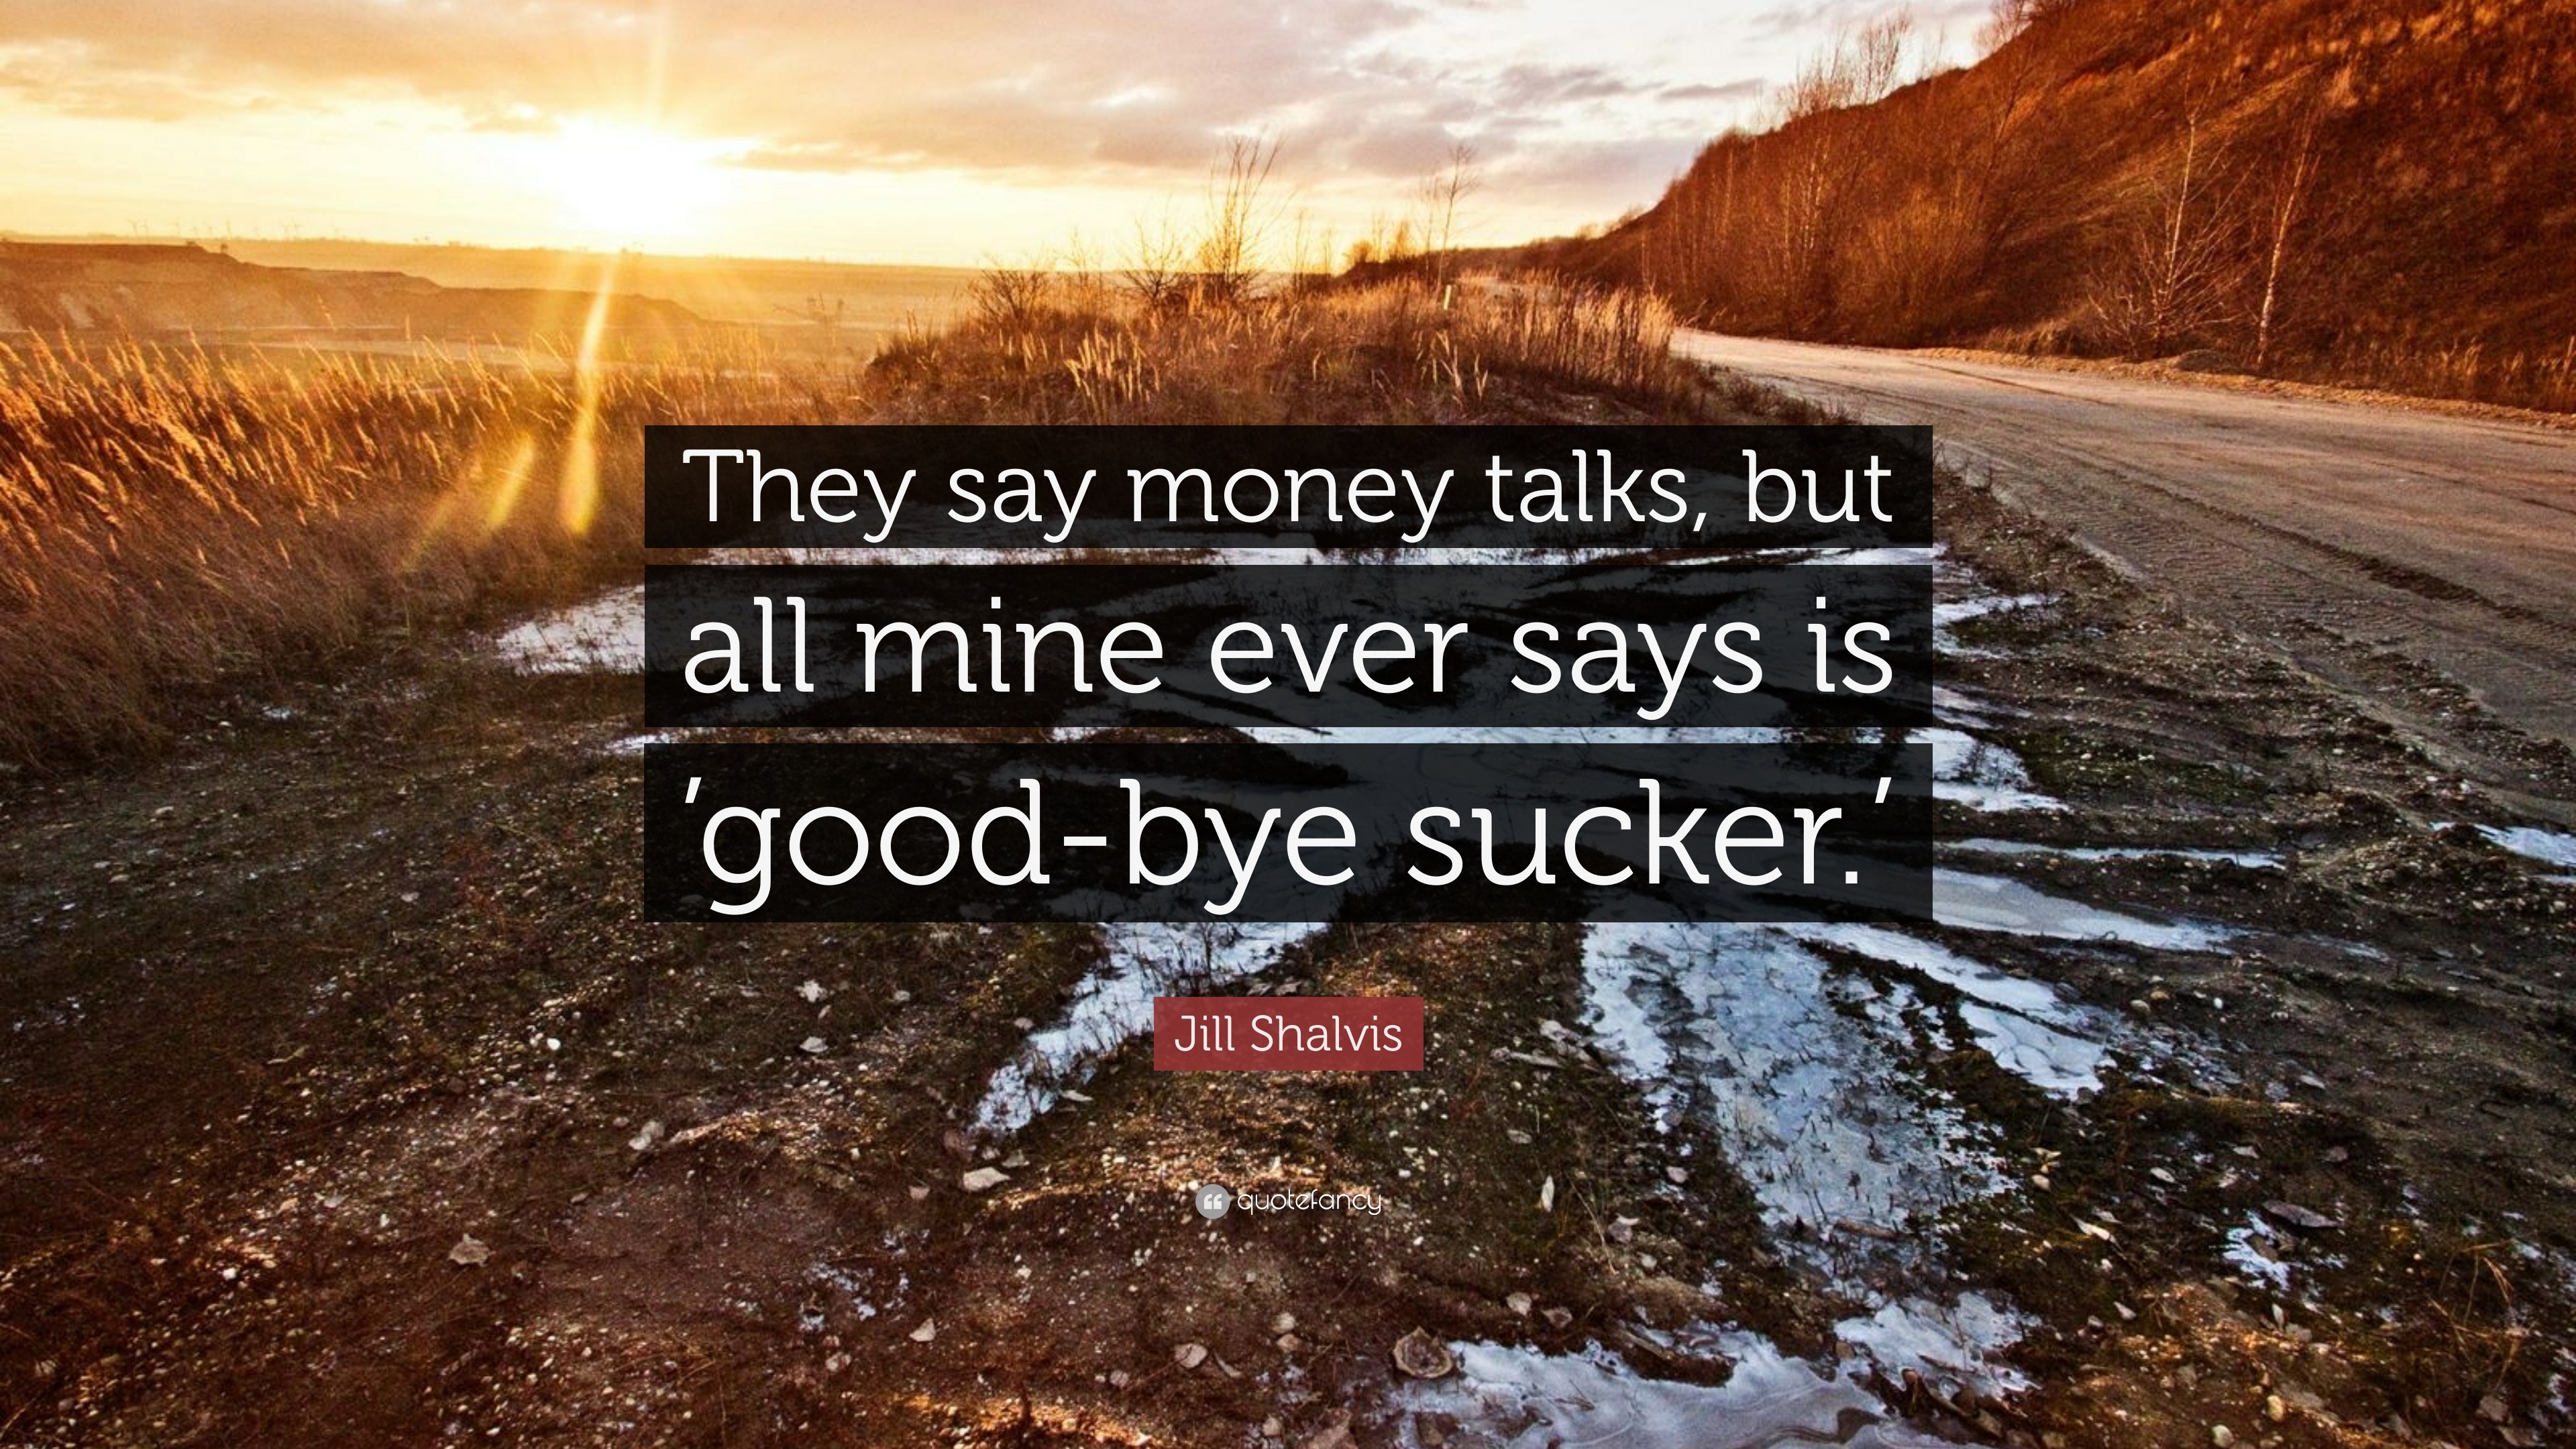 Jill Shalvis Quote: “They say money talks, but all mine ever says is ...